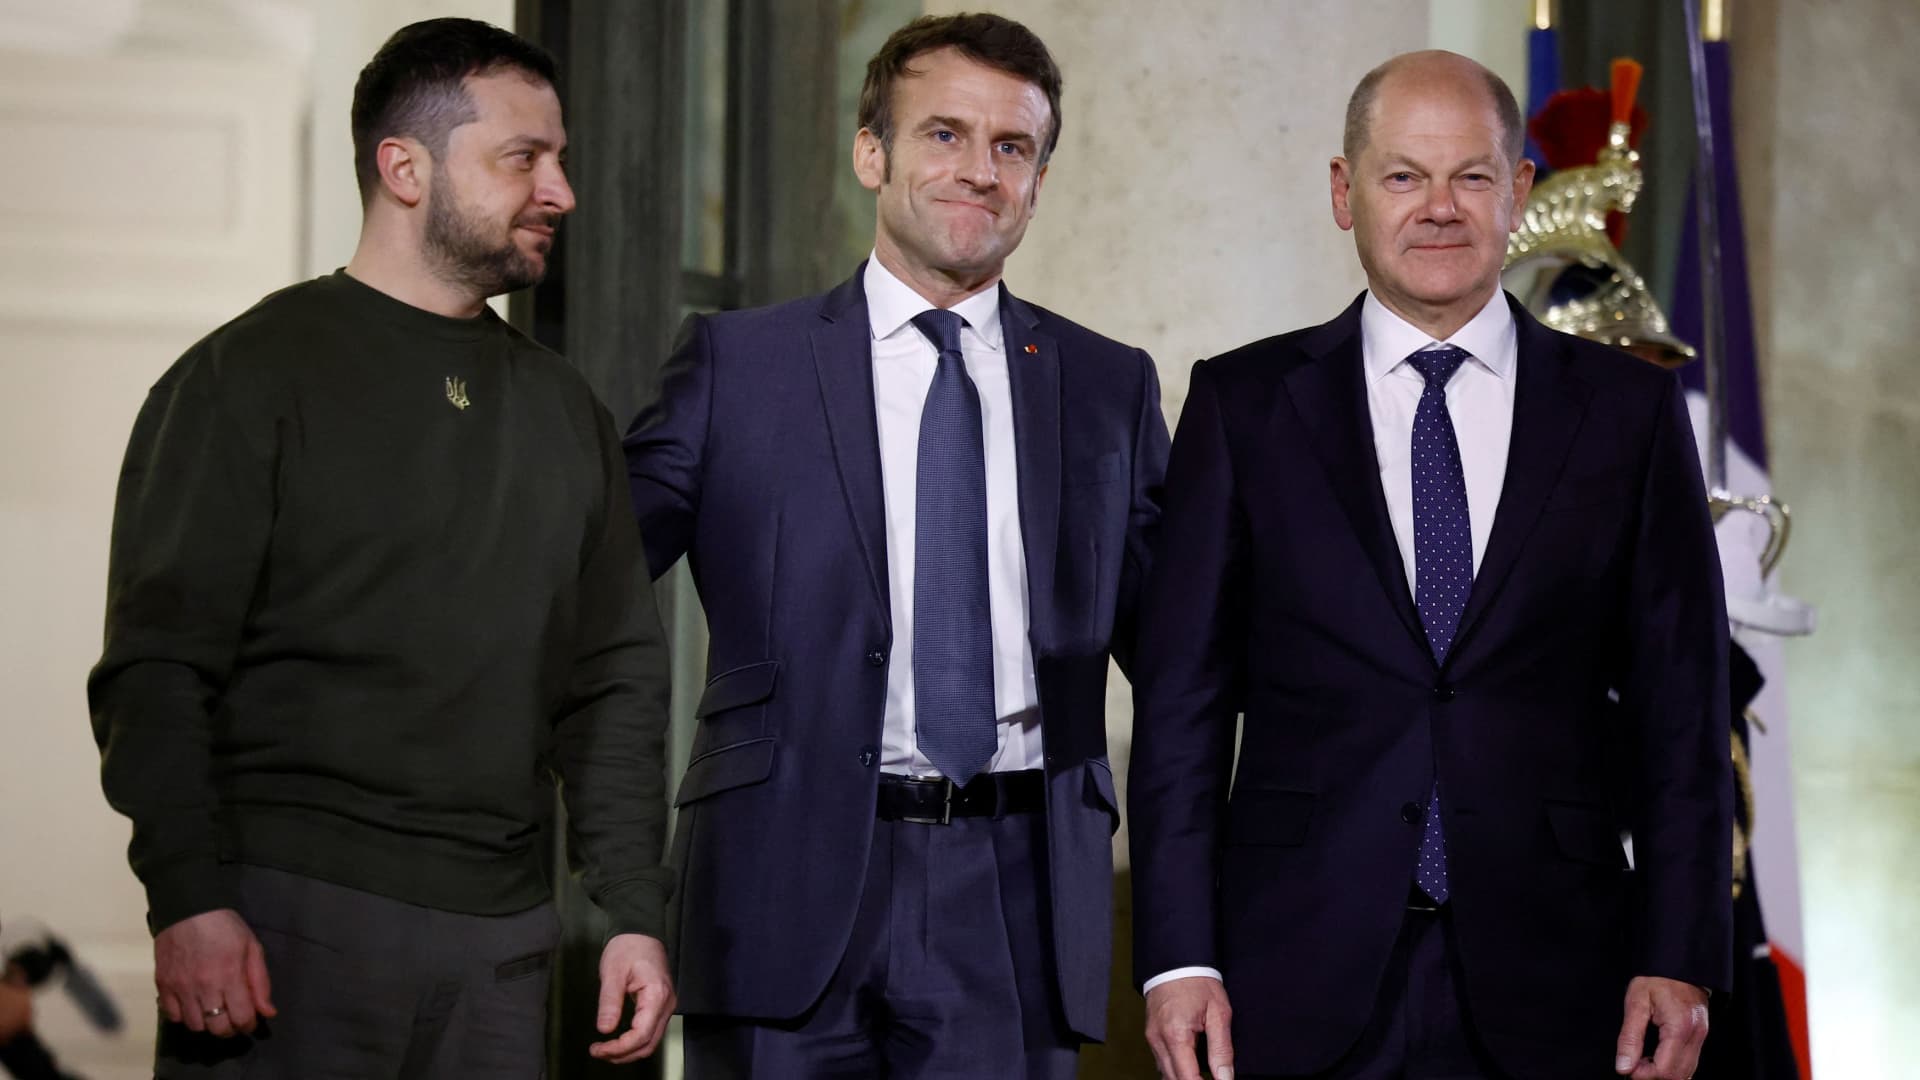 French President Emmanuel Macron welcomes Ukraine's President Volodymyr Zelenskyy and German Chancellor Olaf Scholz for a meeting at the Elysee Palace in Paris, France, February 8, 2023.